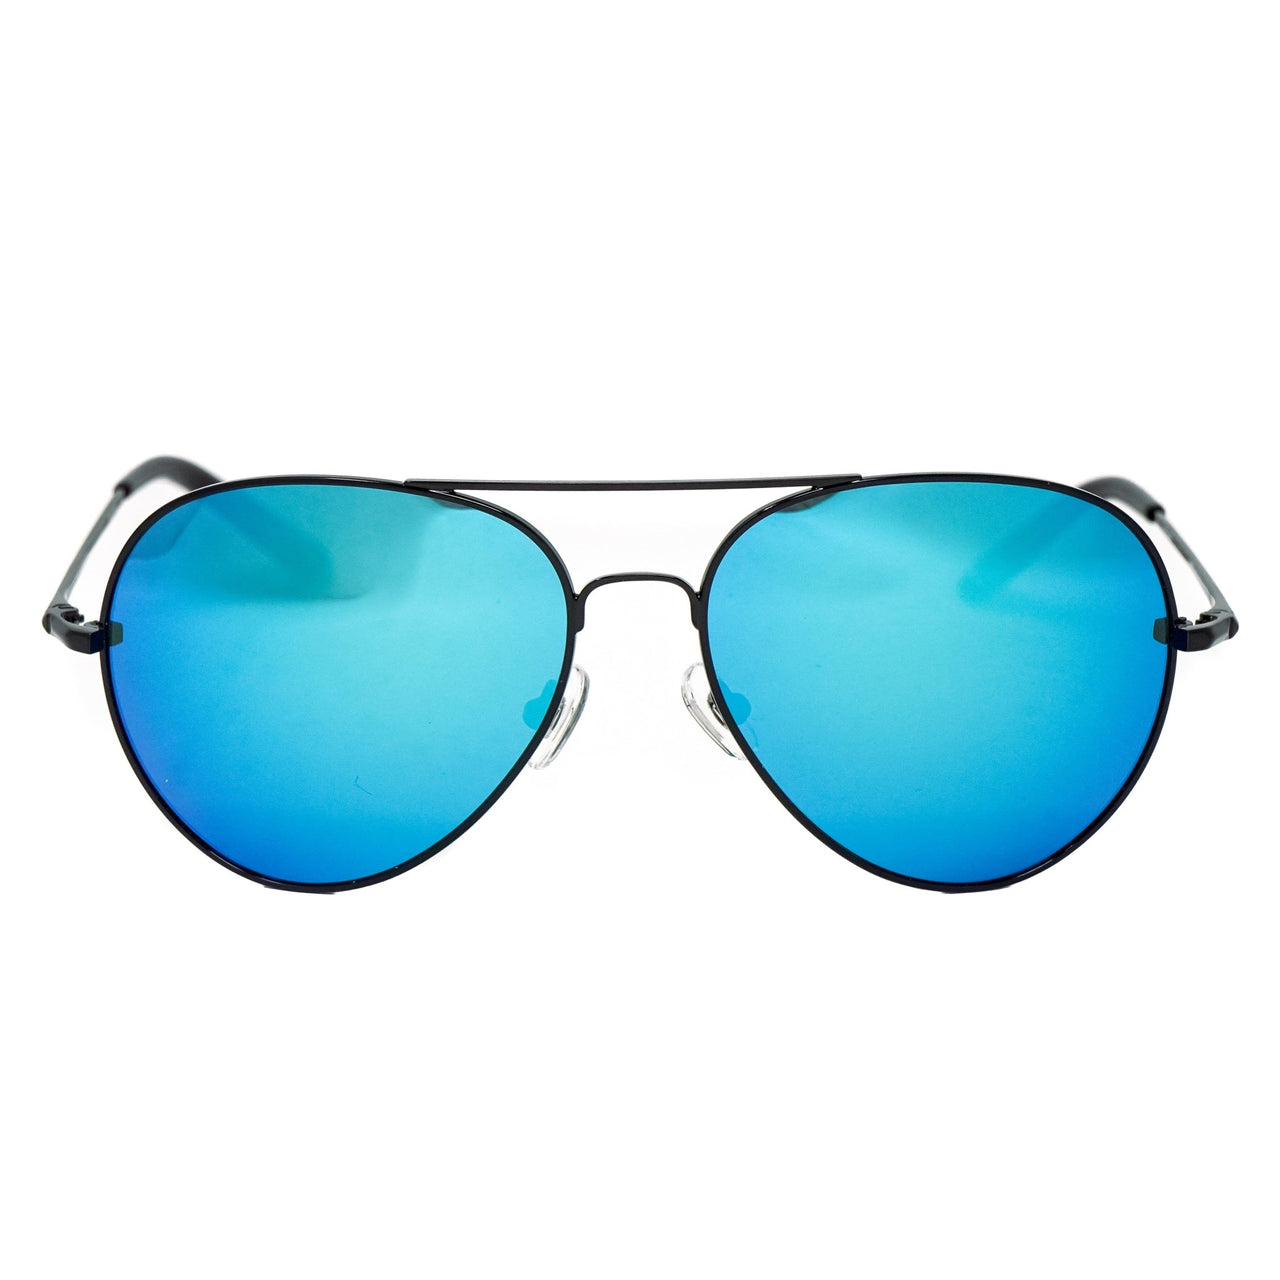 Copy of Matthew Williamson Sunglasses Black and Blue - Watches & Crystals